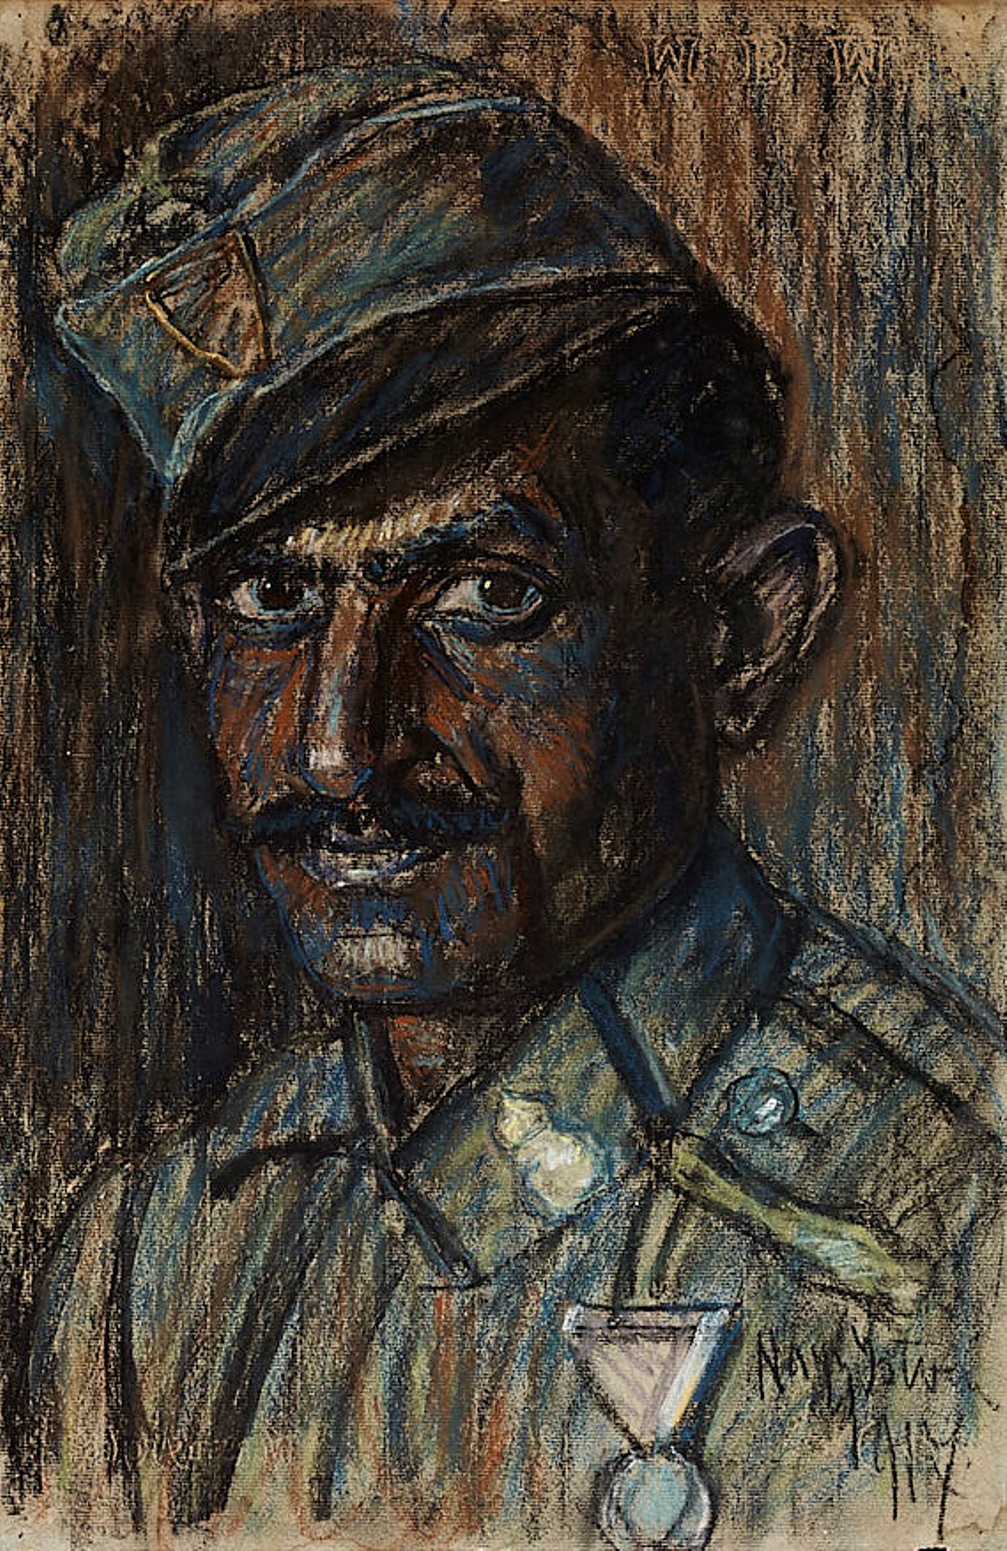 Gypsy soldier with medals